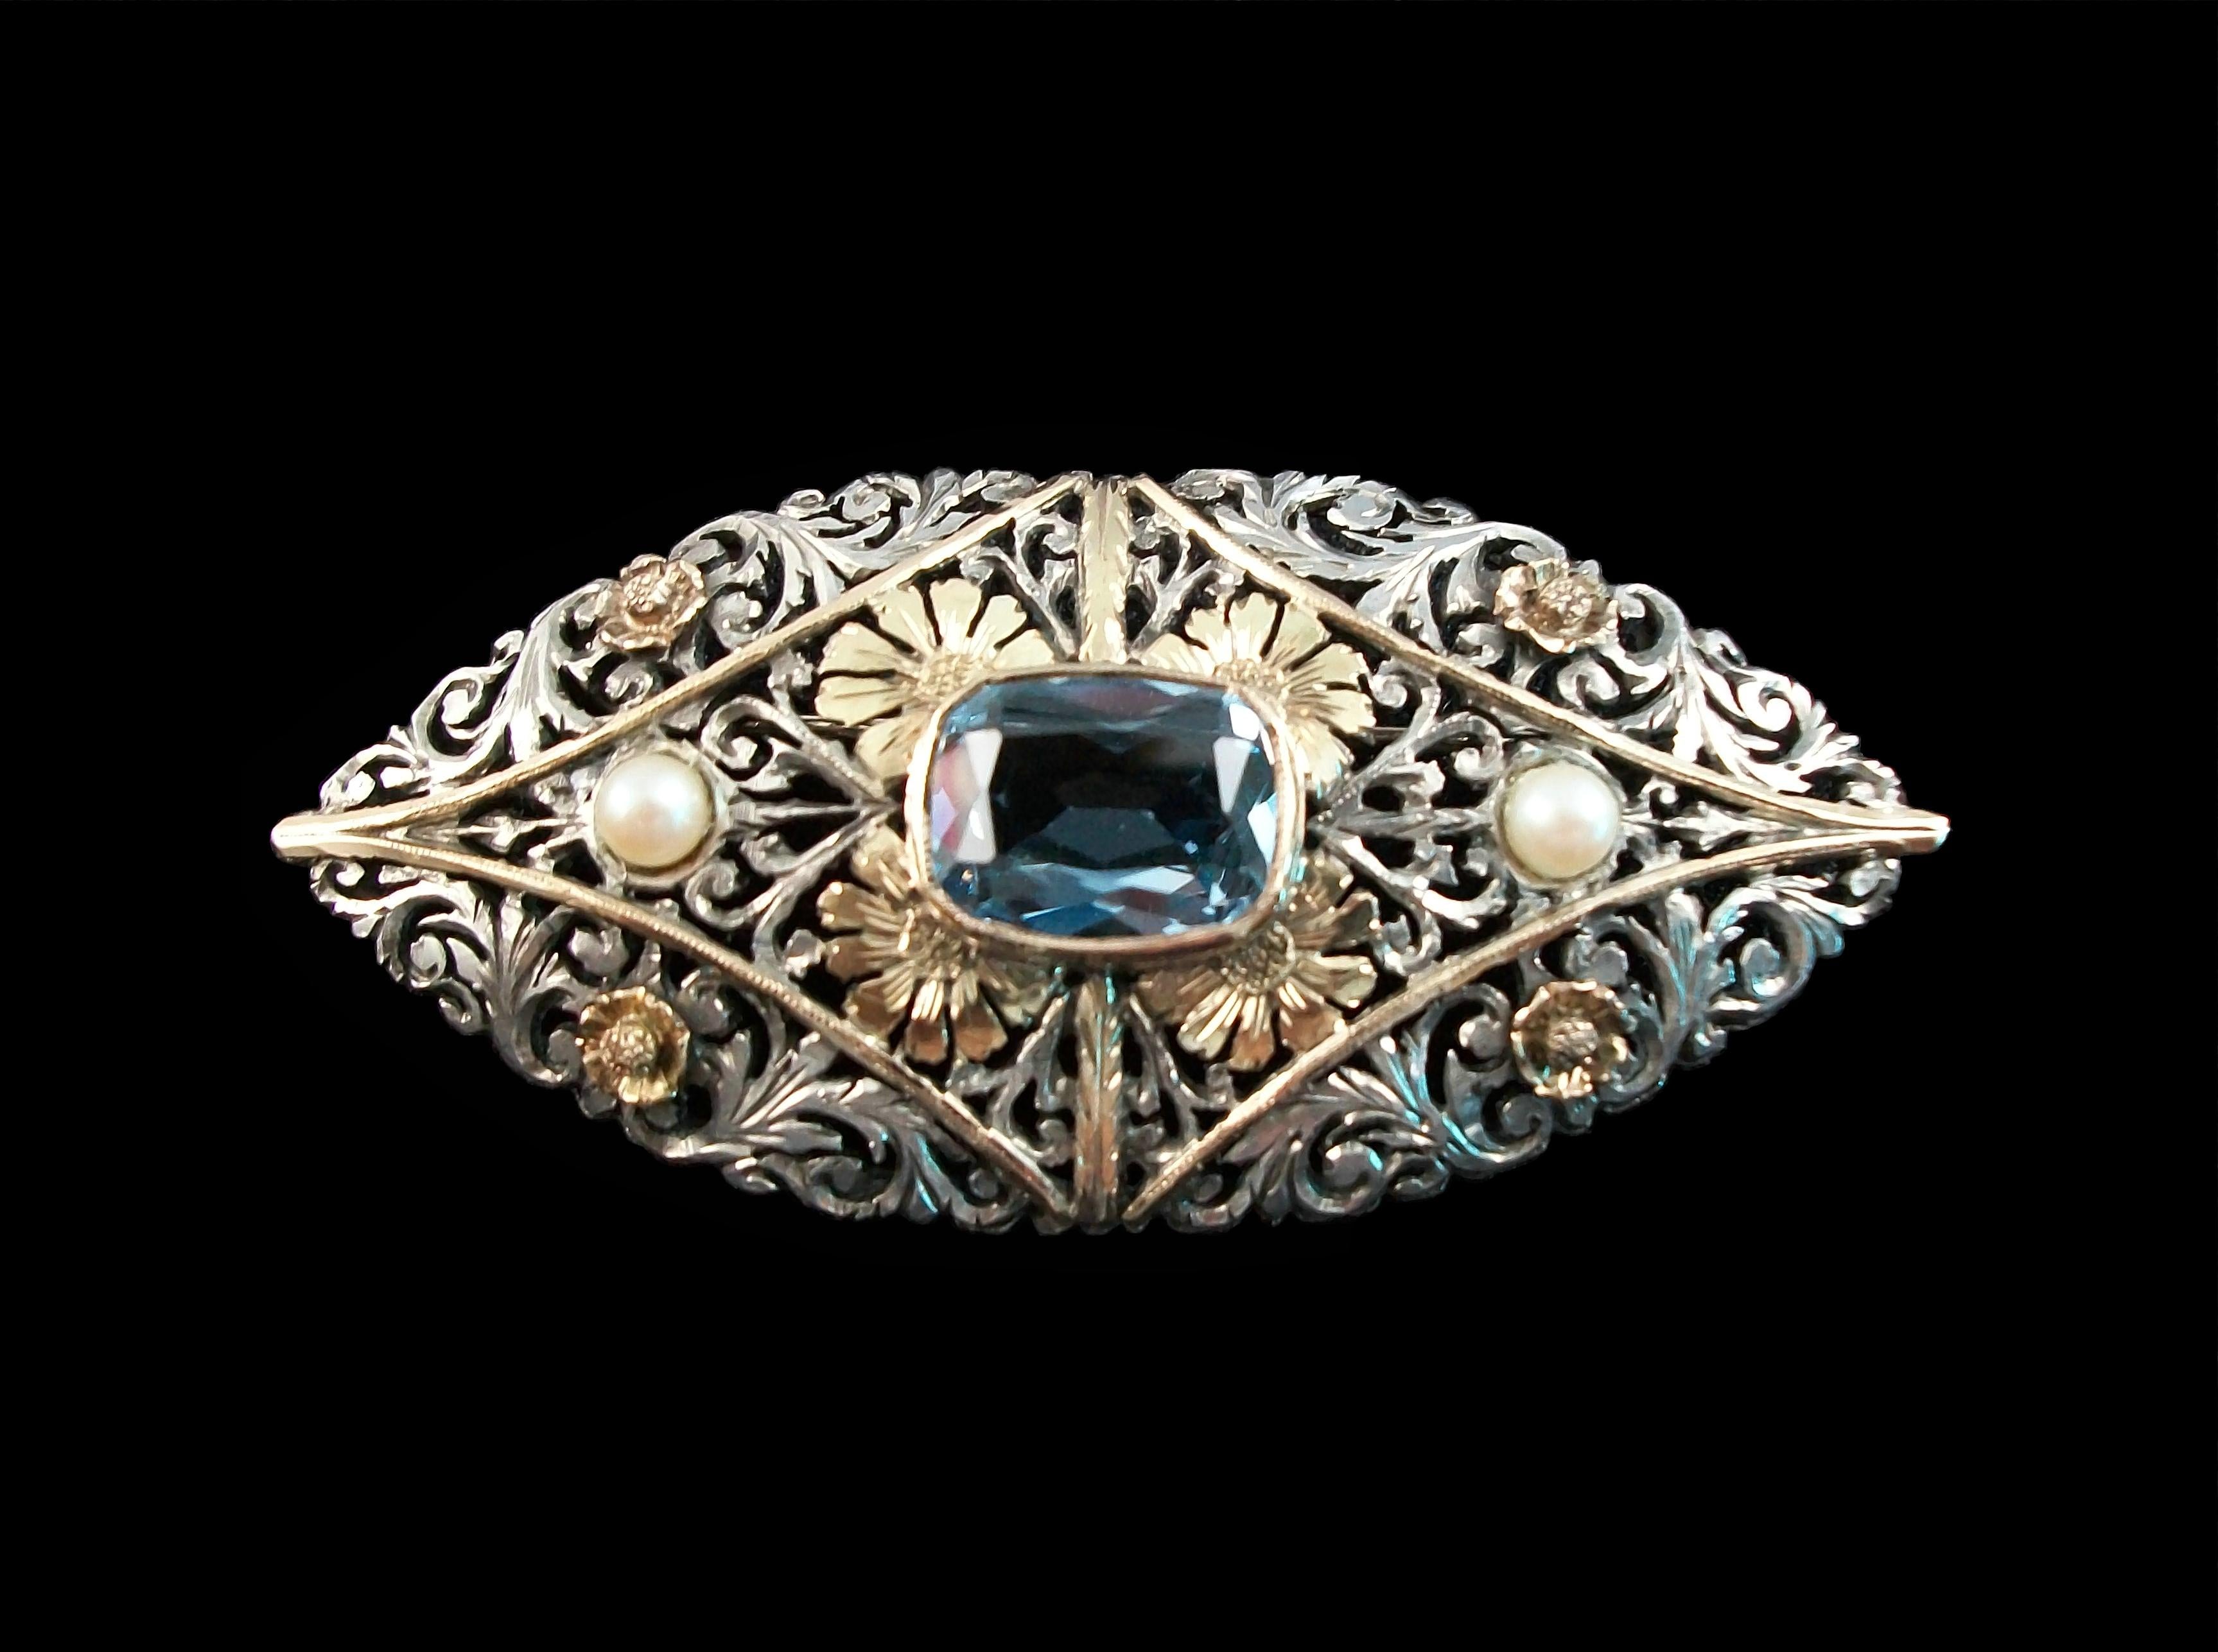 Women's or Men's Art Nouveau Aquamarine & Pearl Brooch Set in Silver & Gold - France - Circa 1900 For Sale